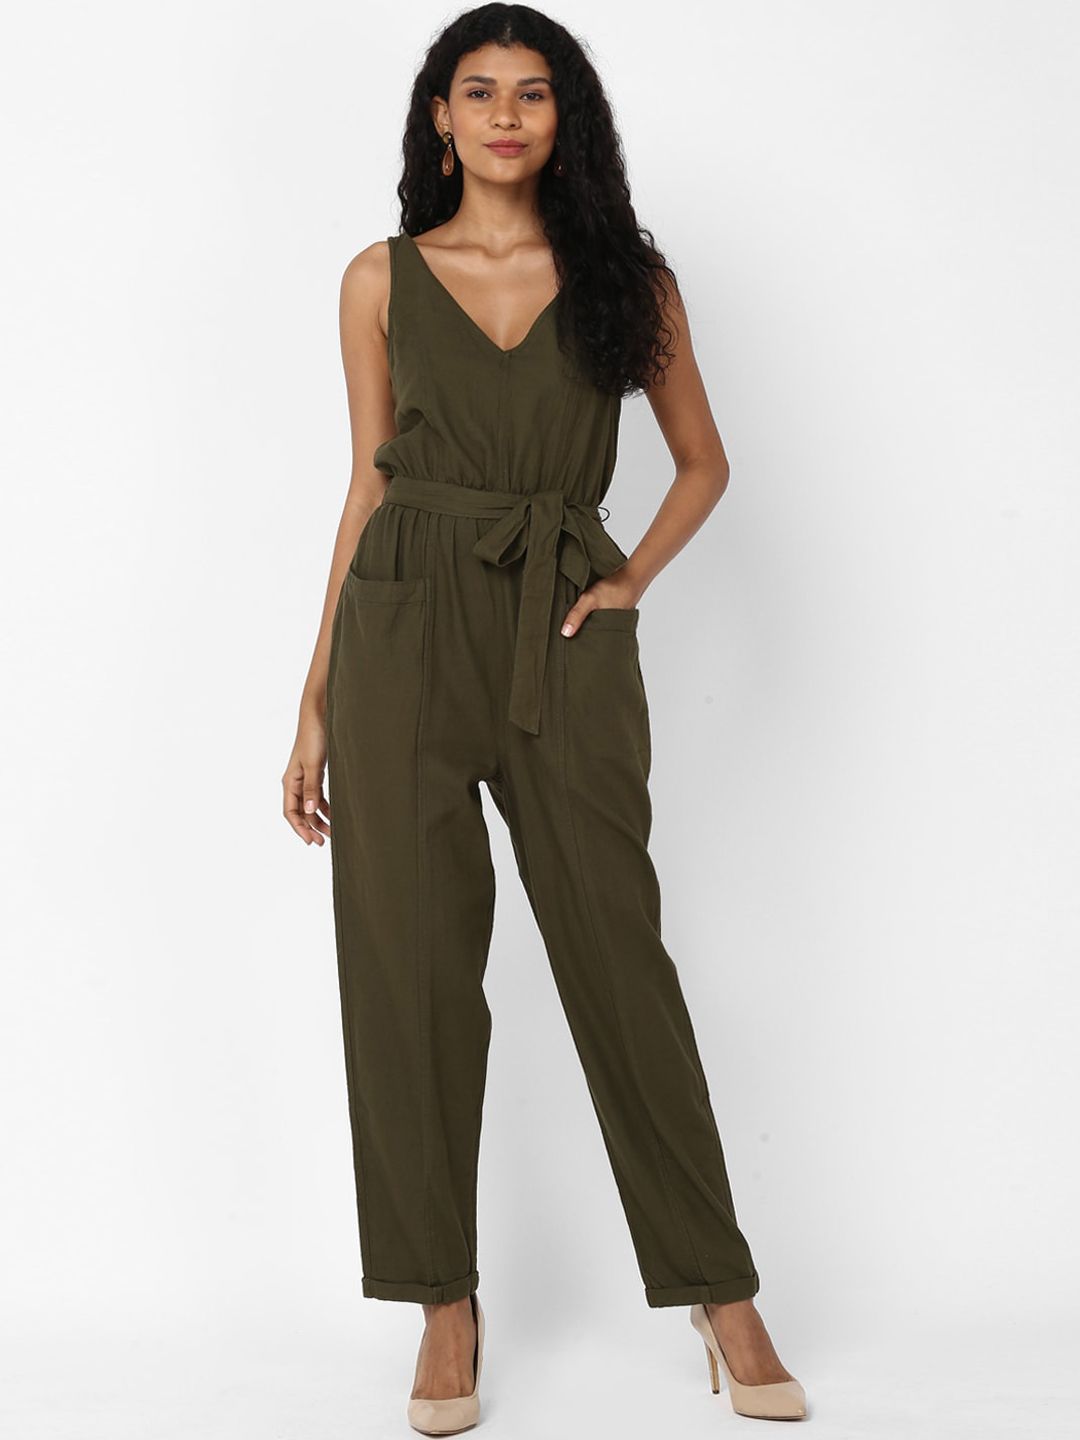 AMERICAN EAGLE OUTFITTERS Women Olive Green Solid Cotton Jumpsuit Price in India